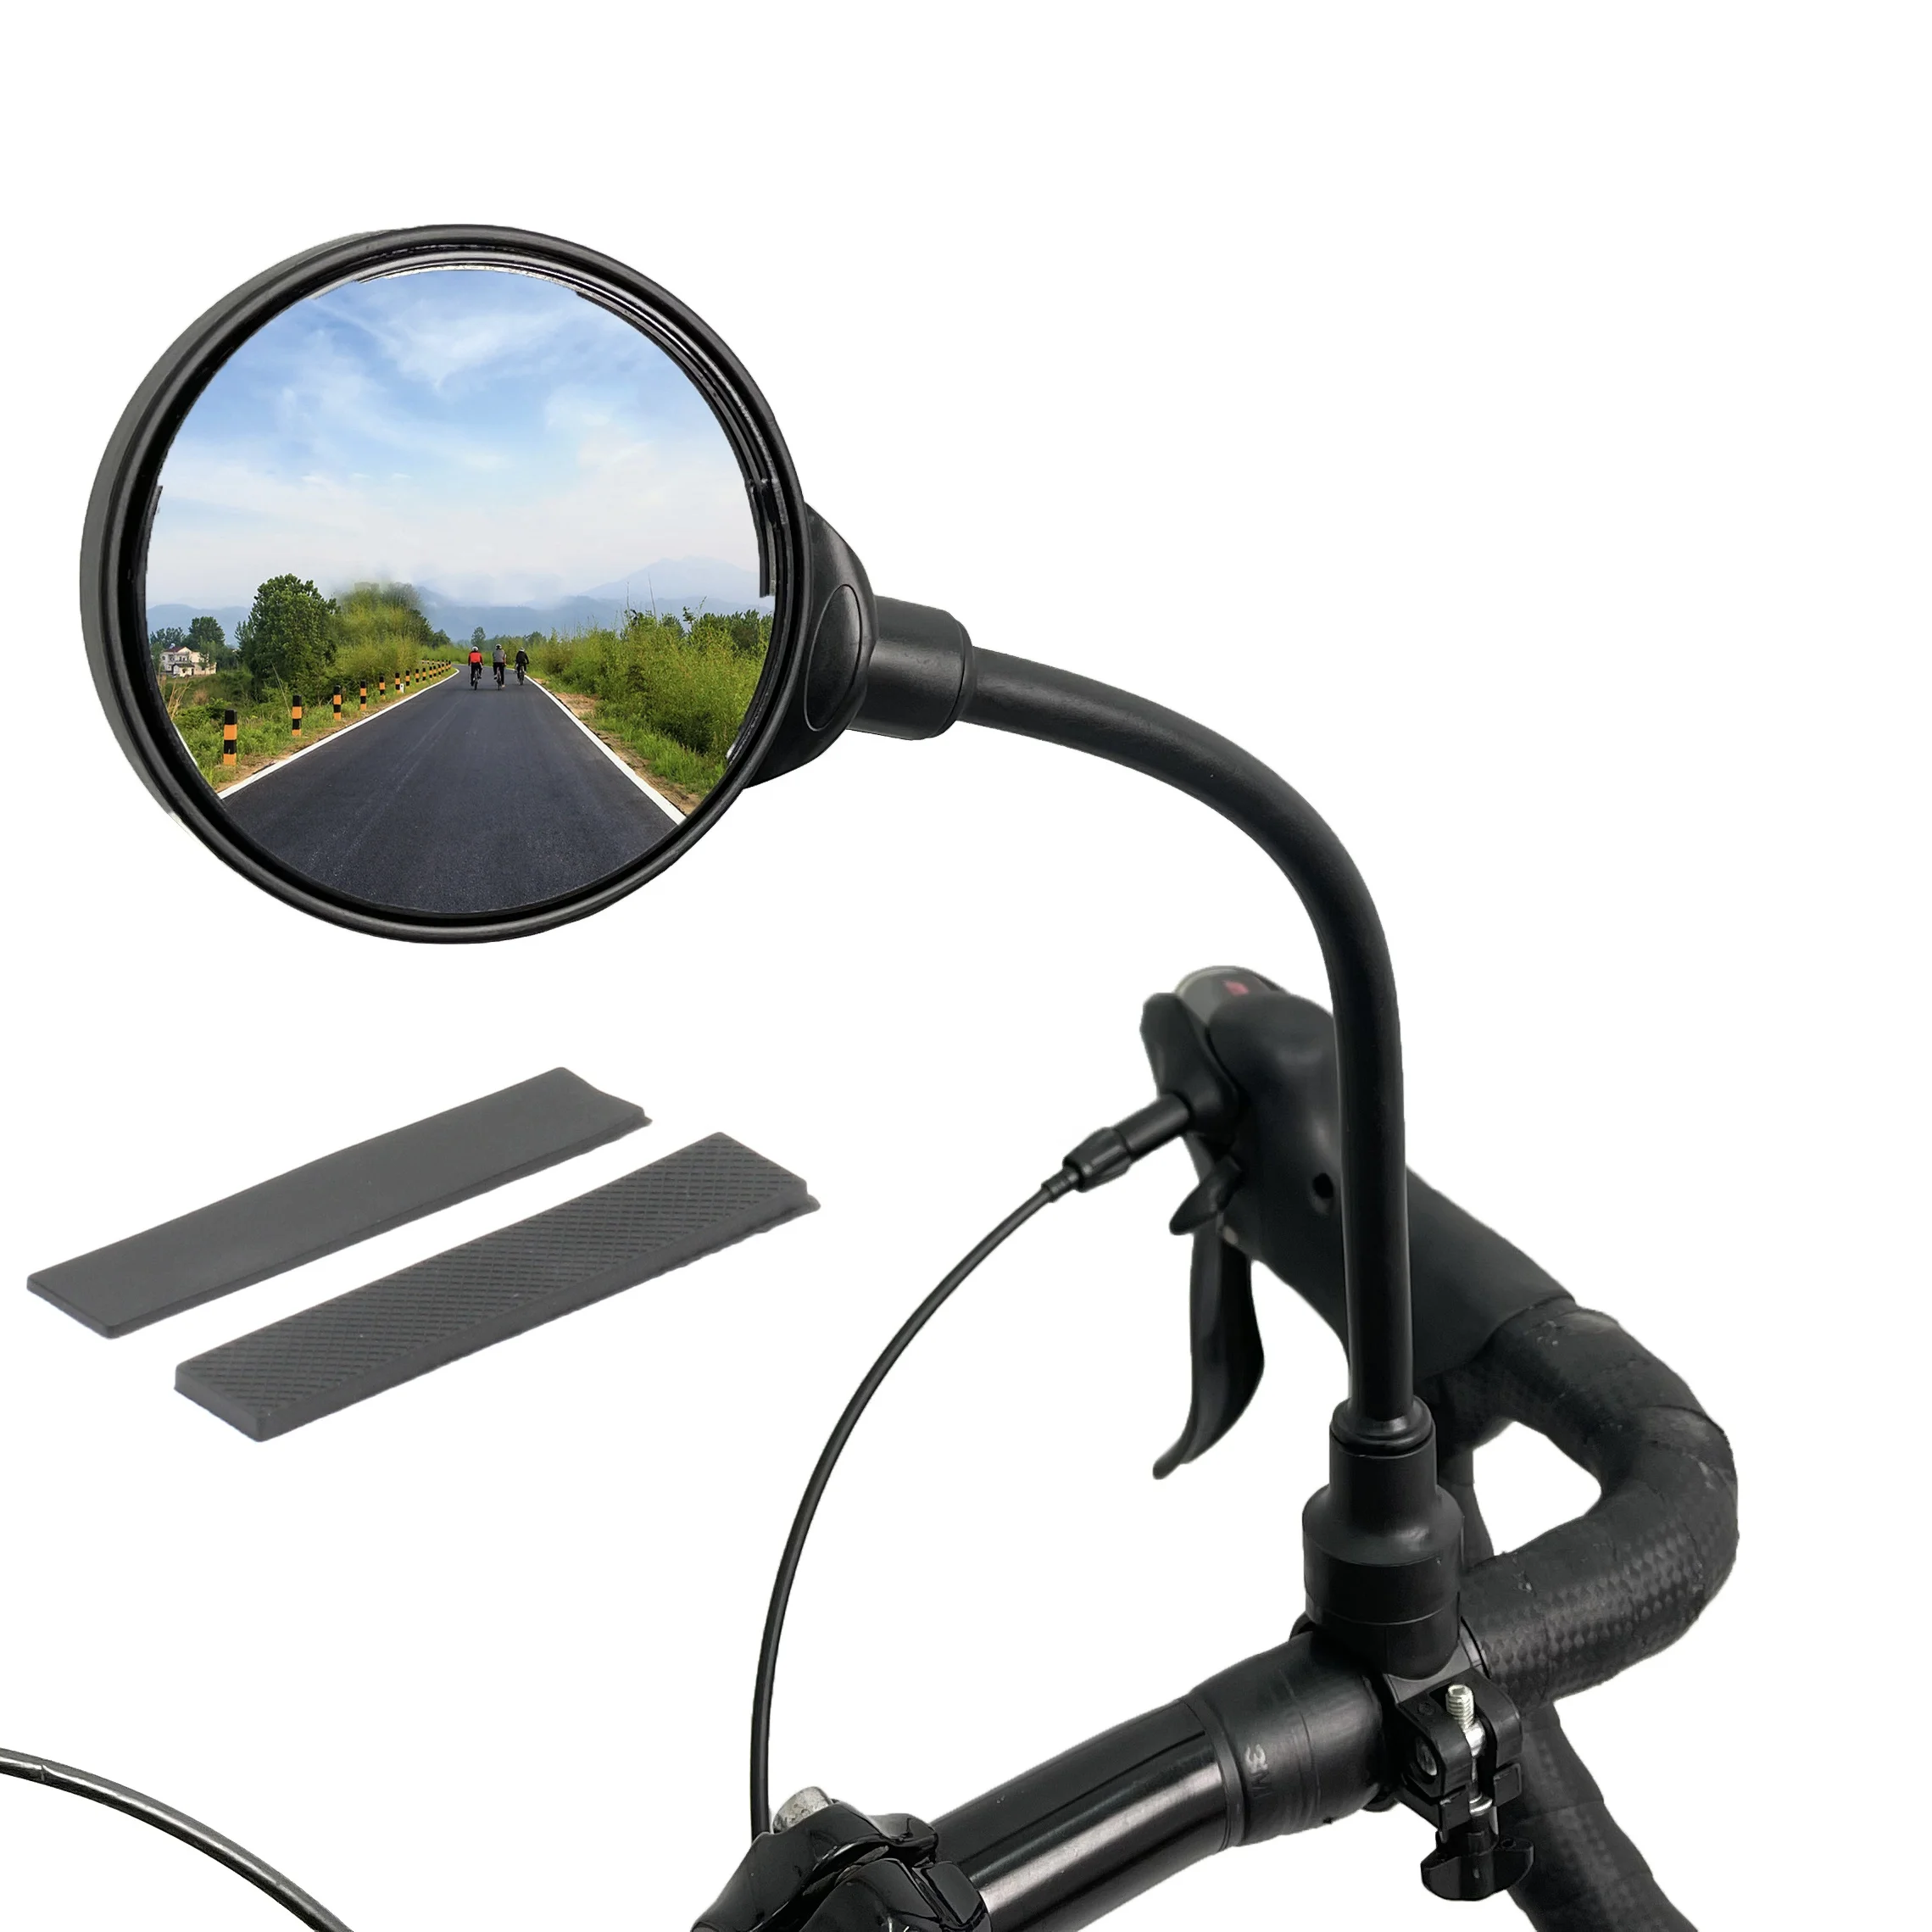 

REYGEAK Bike Rearview Mirror Handlebar Mount Adjustable Rotatable Bicycle Rear View Glass Mirror Wide Angle Convex Safety